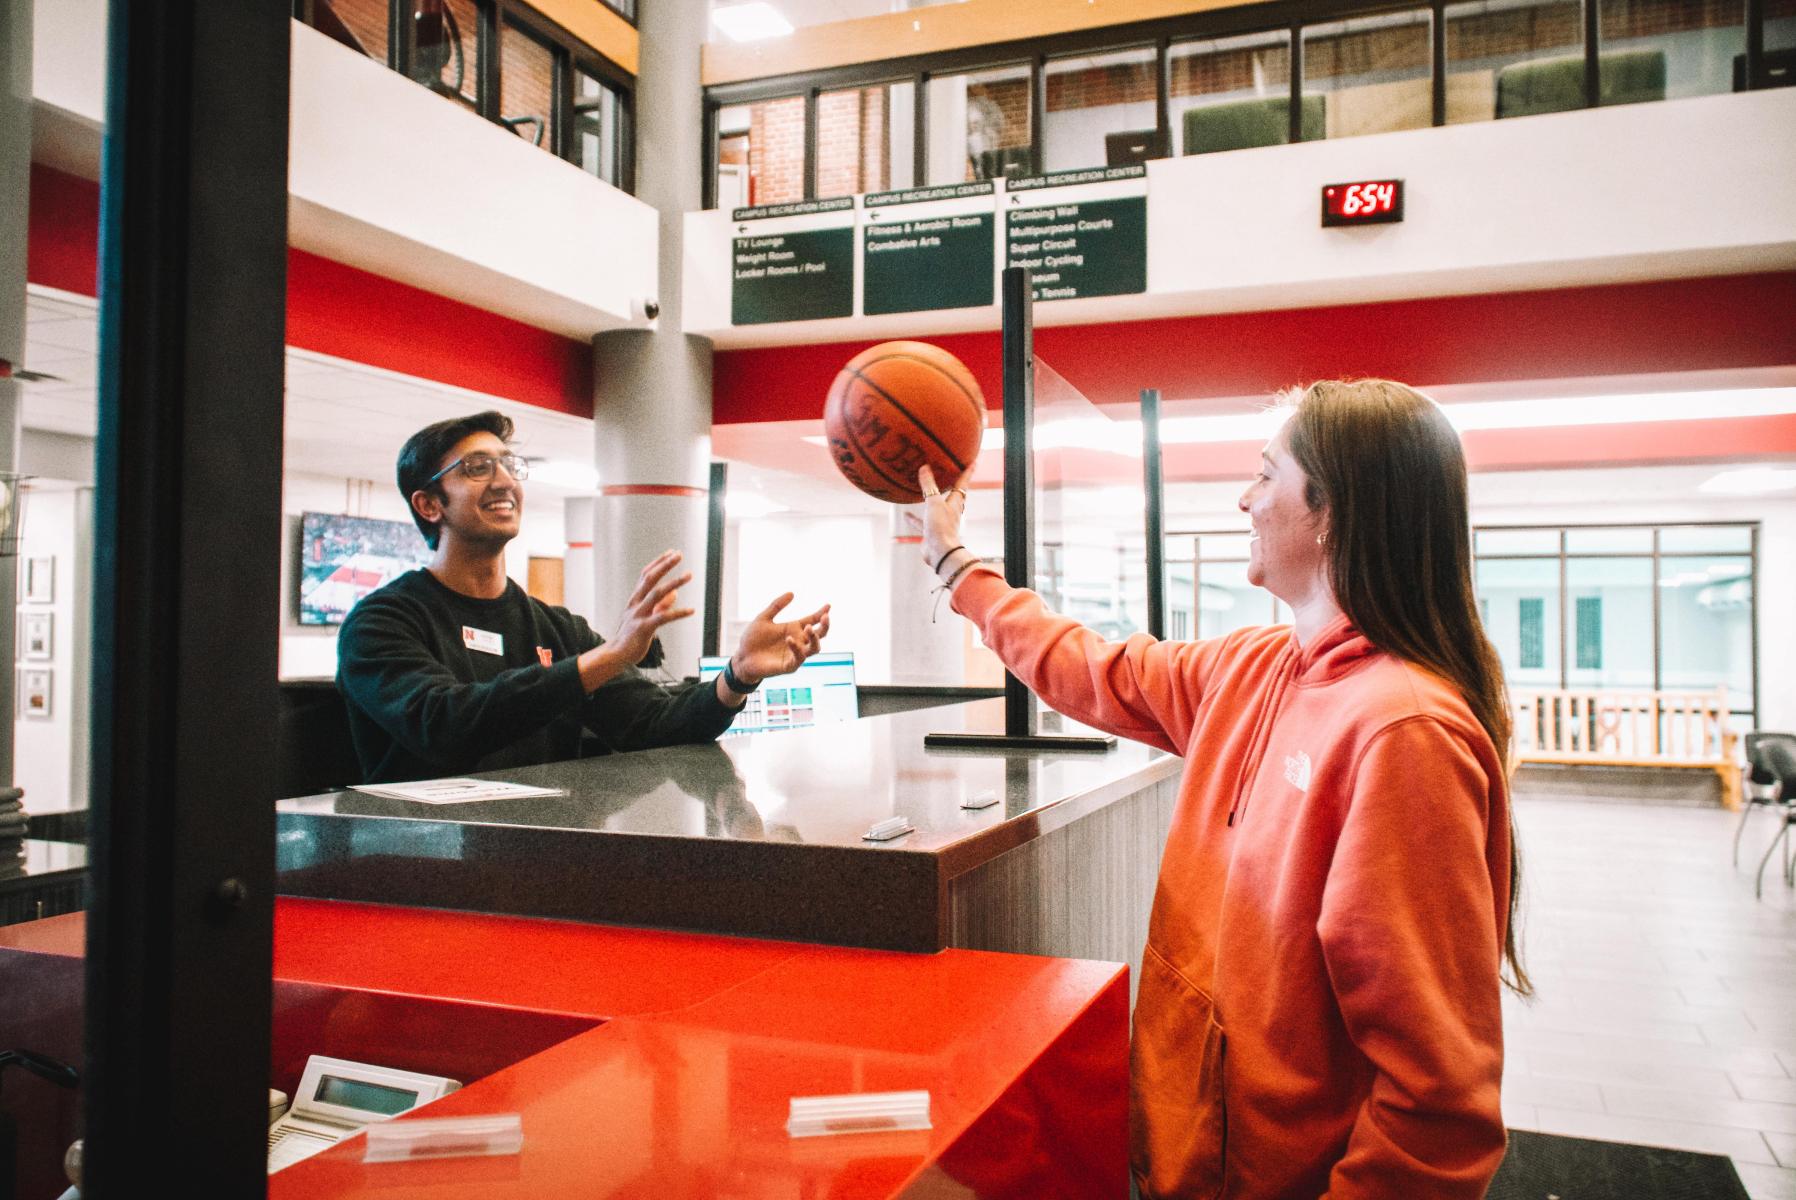 Student returns basketball to the front desk at the Campus Recreation Center